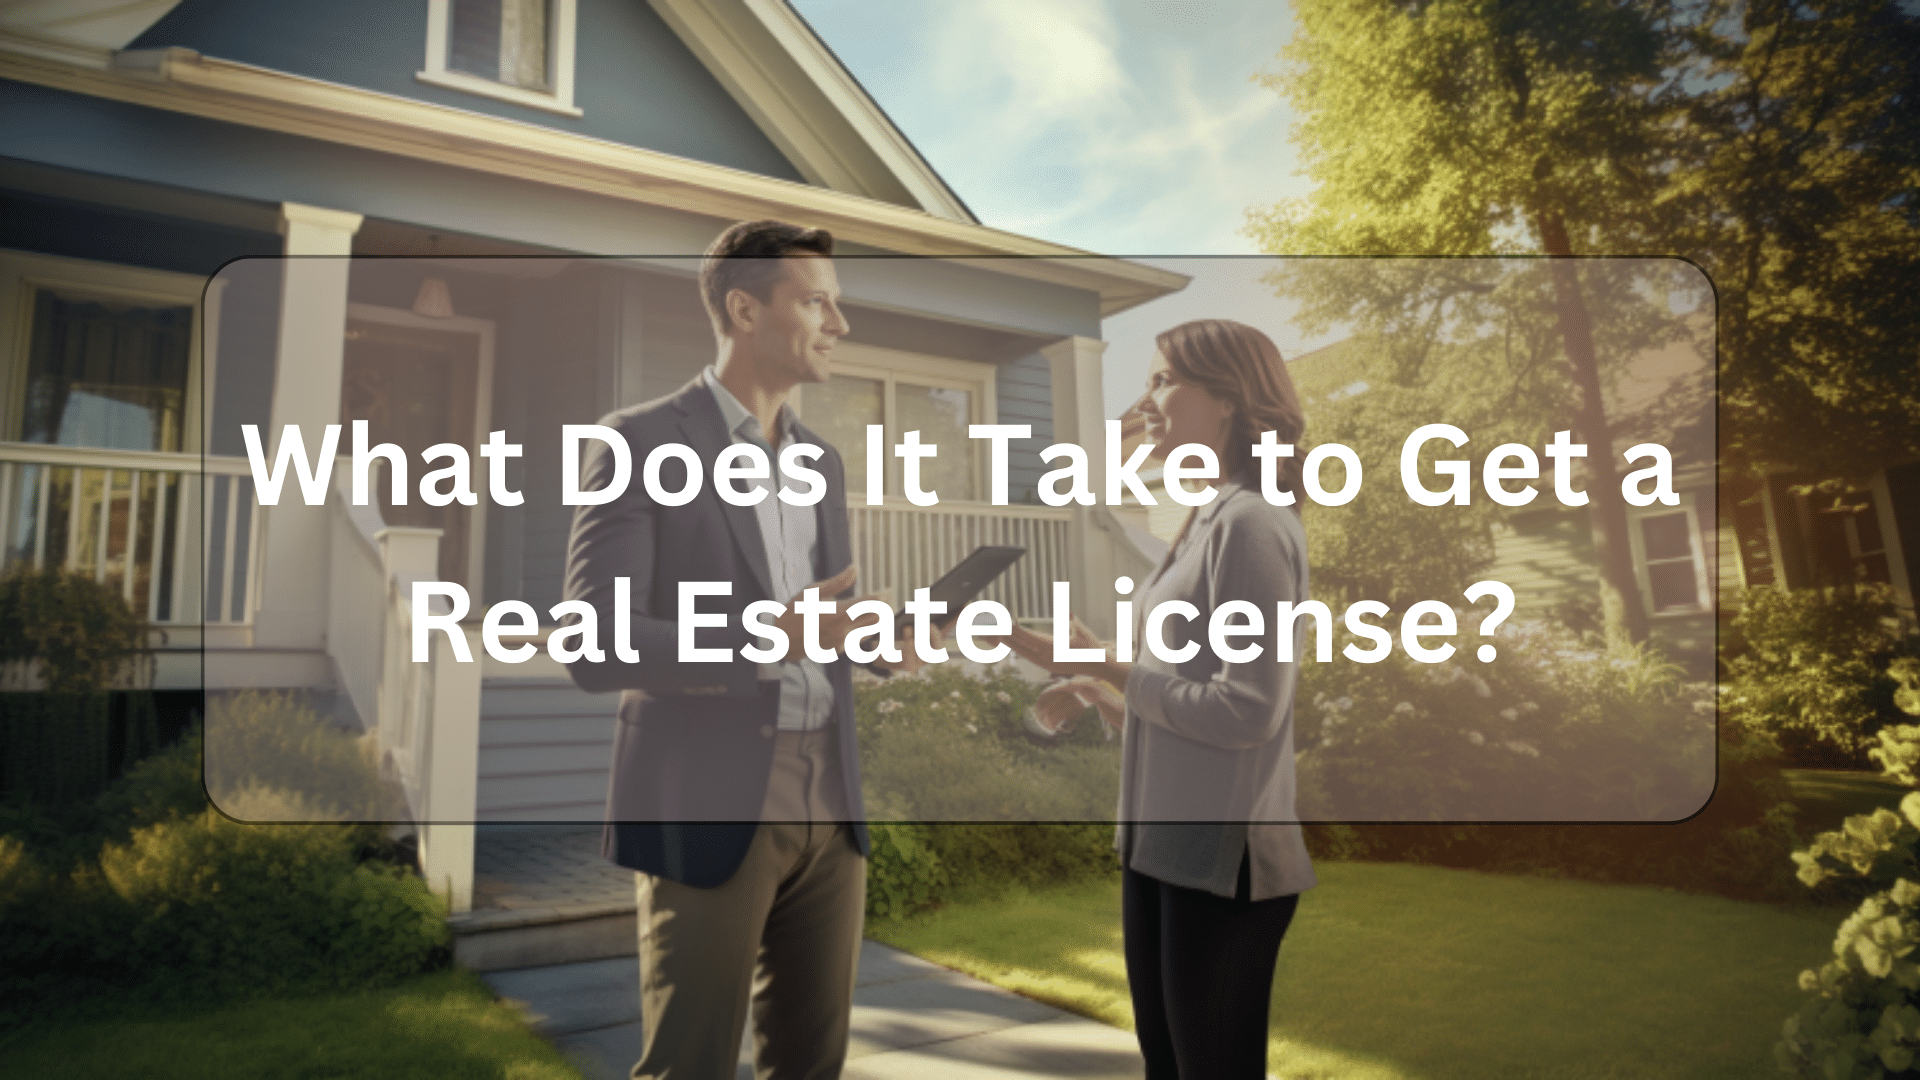 What Does It Take to Get a Real Estate License?